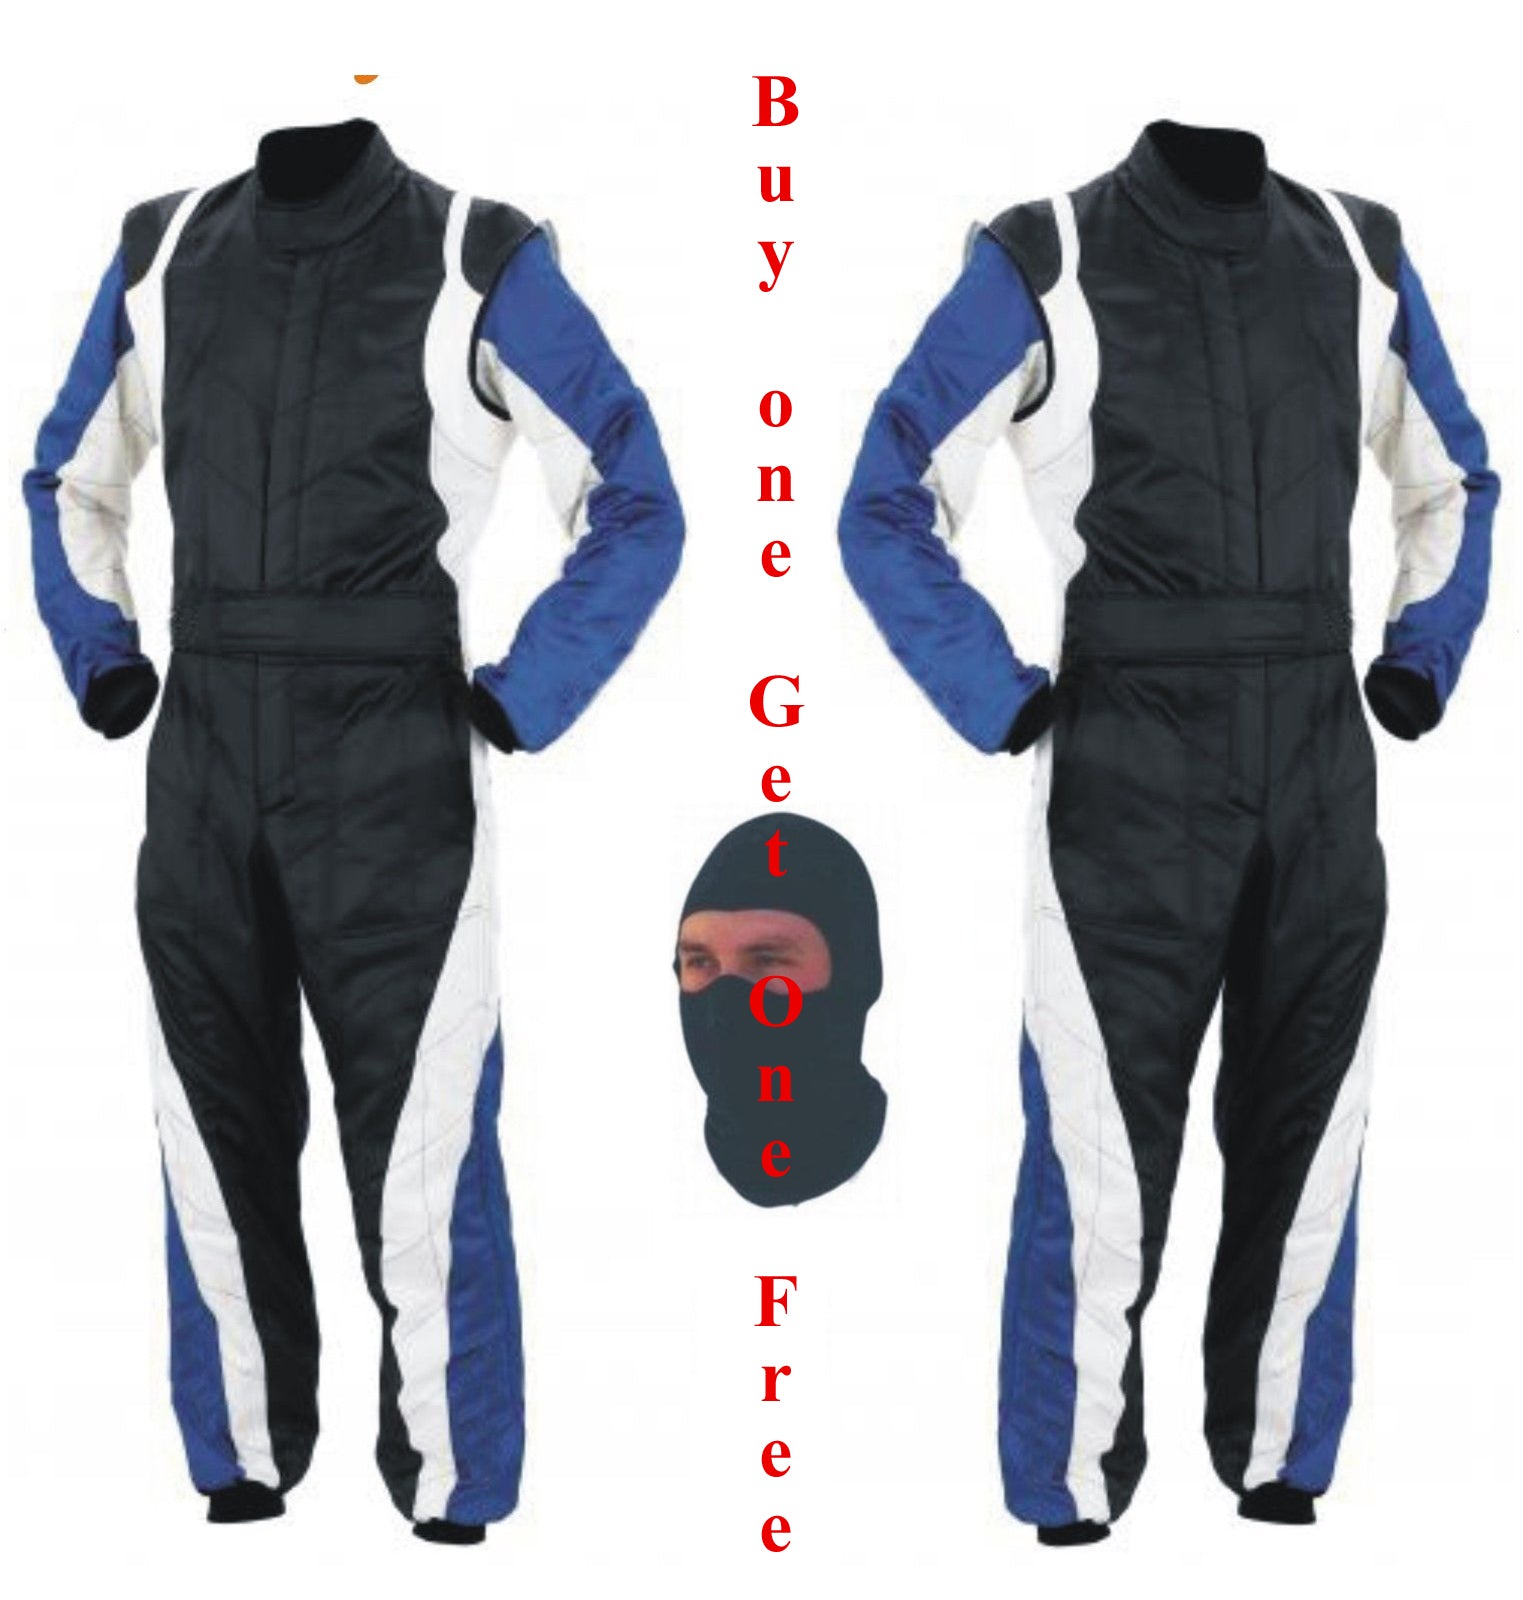 Summer Go Kart Race Suit Buy One Get One Free with Balaclava